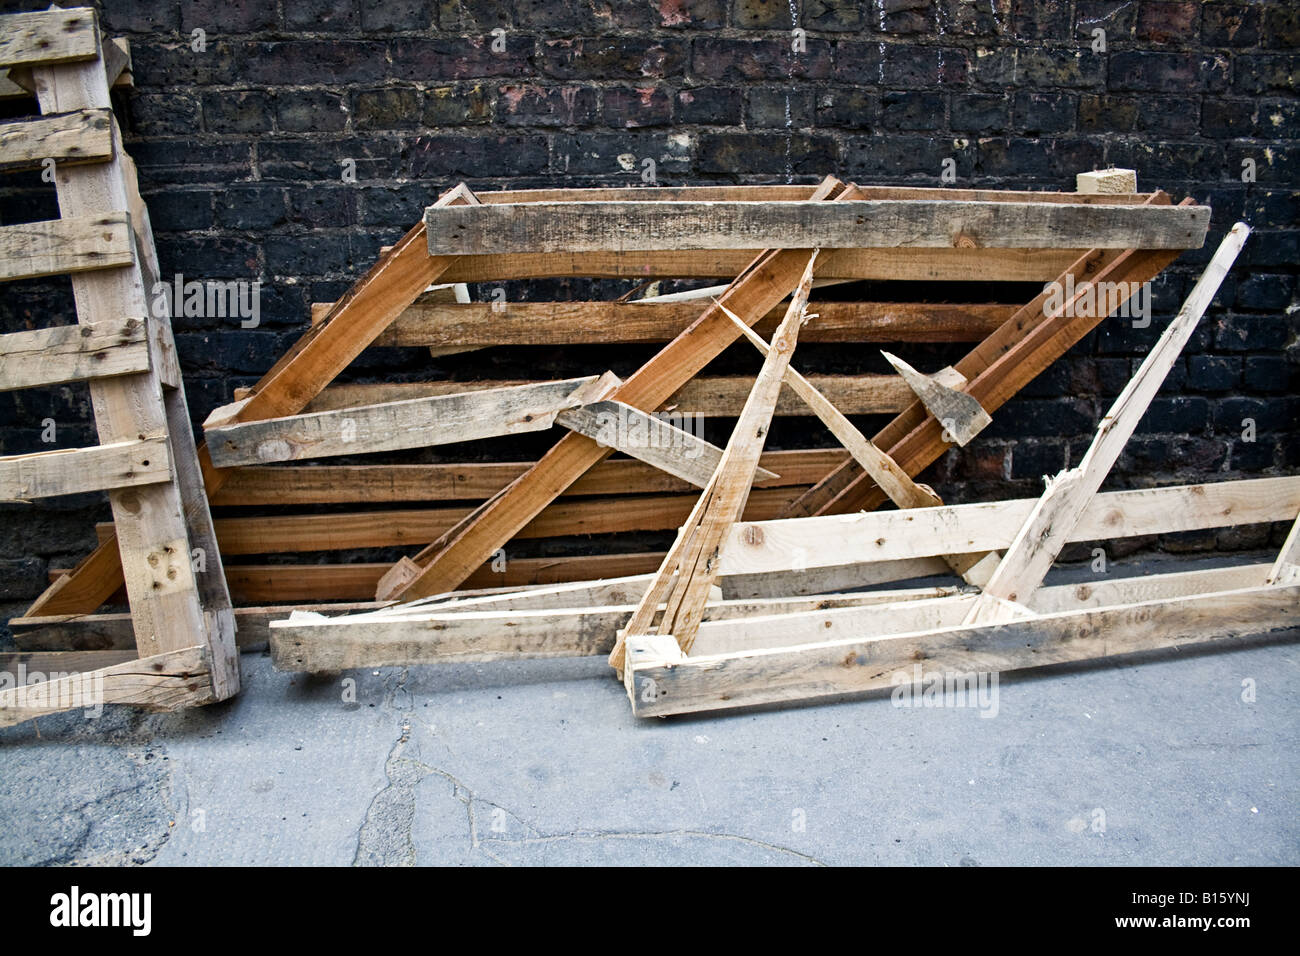 Wooden pallets and scrap wood for recycling Stock Photo - Alamy